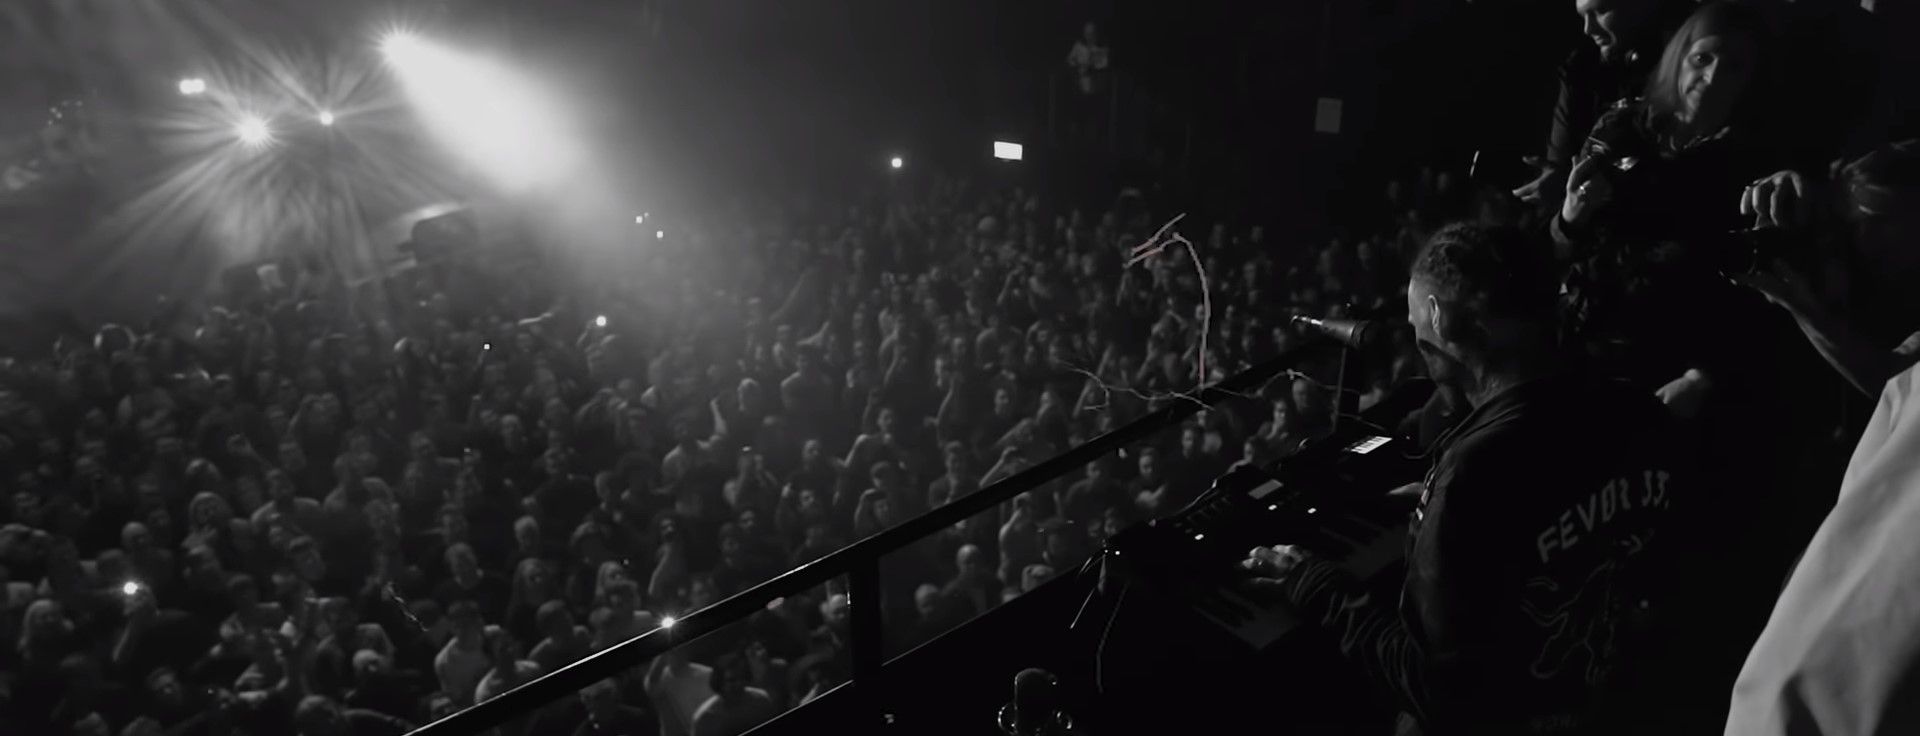 Fever 333 - Am I Here? (Live At London 2019)